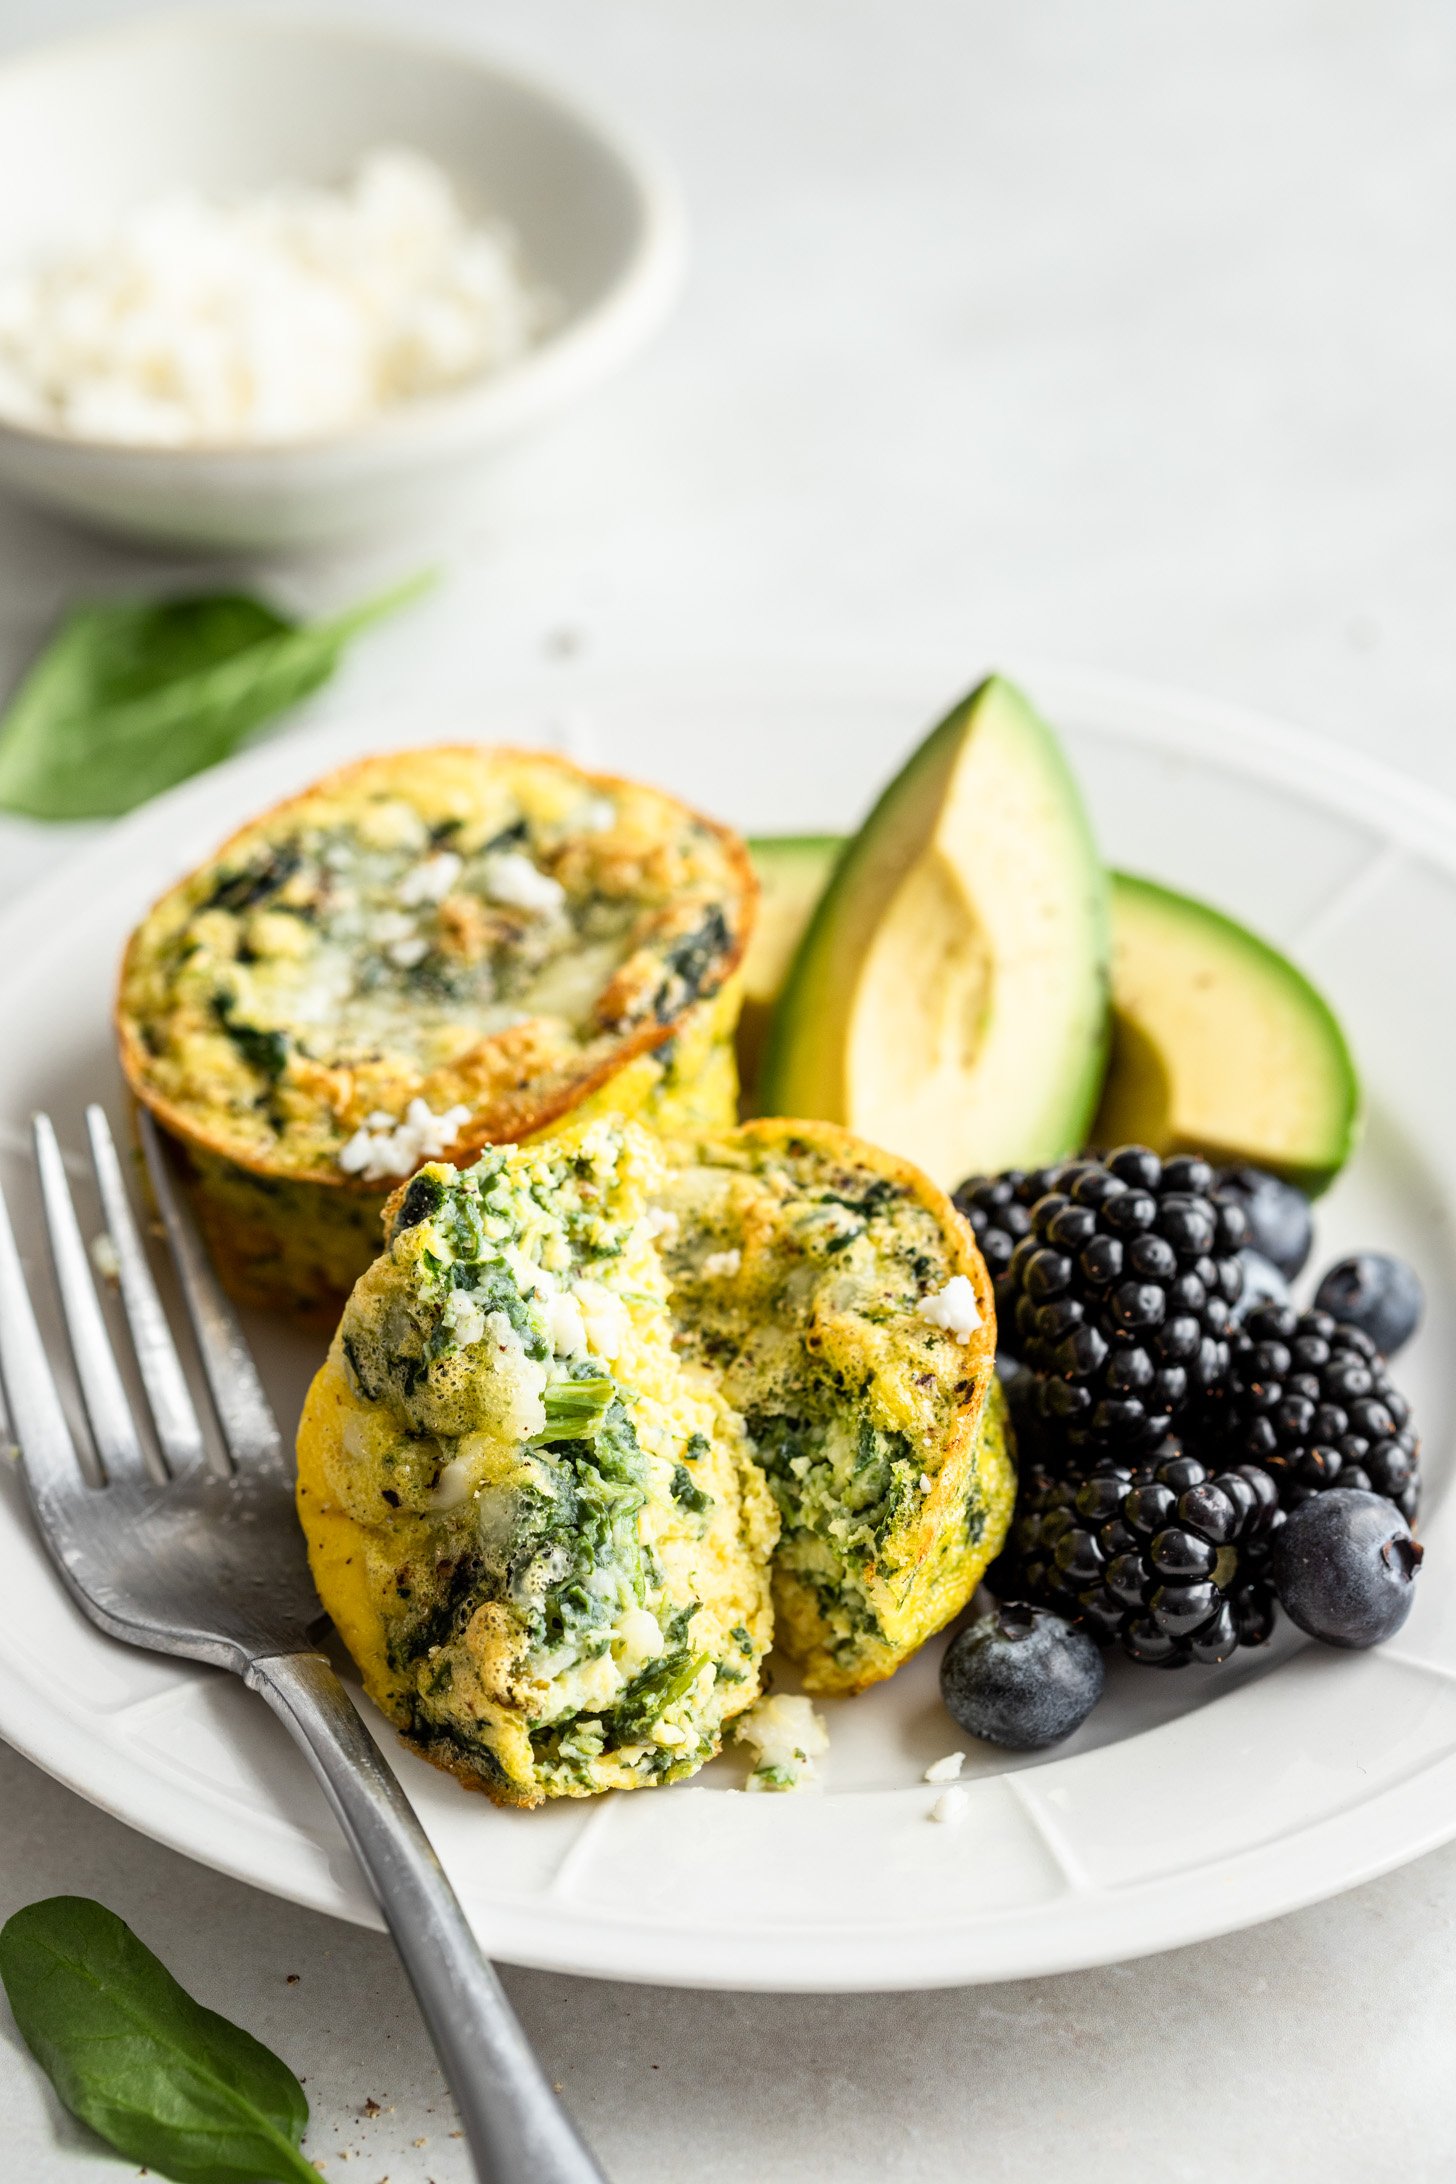 Two feta spinach eggs cups on a plate with avocado and berries. There is a fork on the plate and one egg muffin has been cut in half.